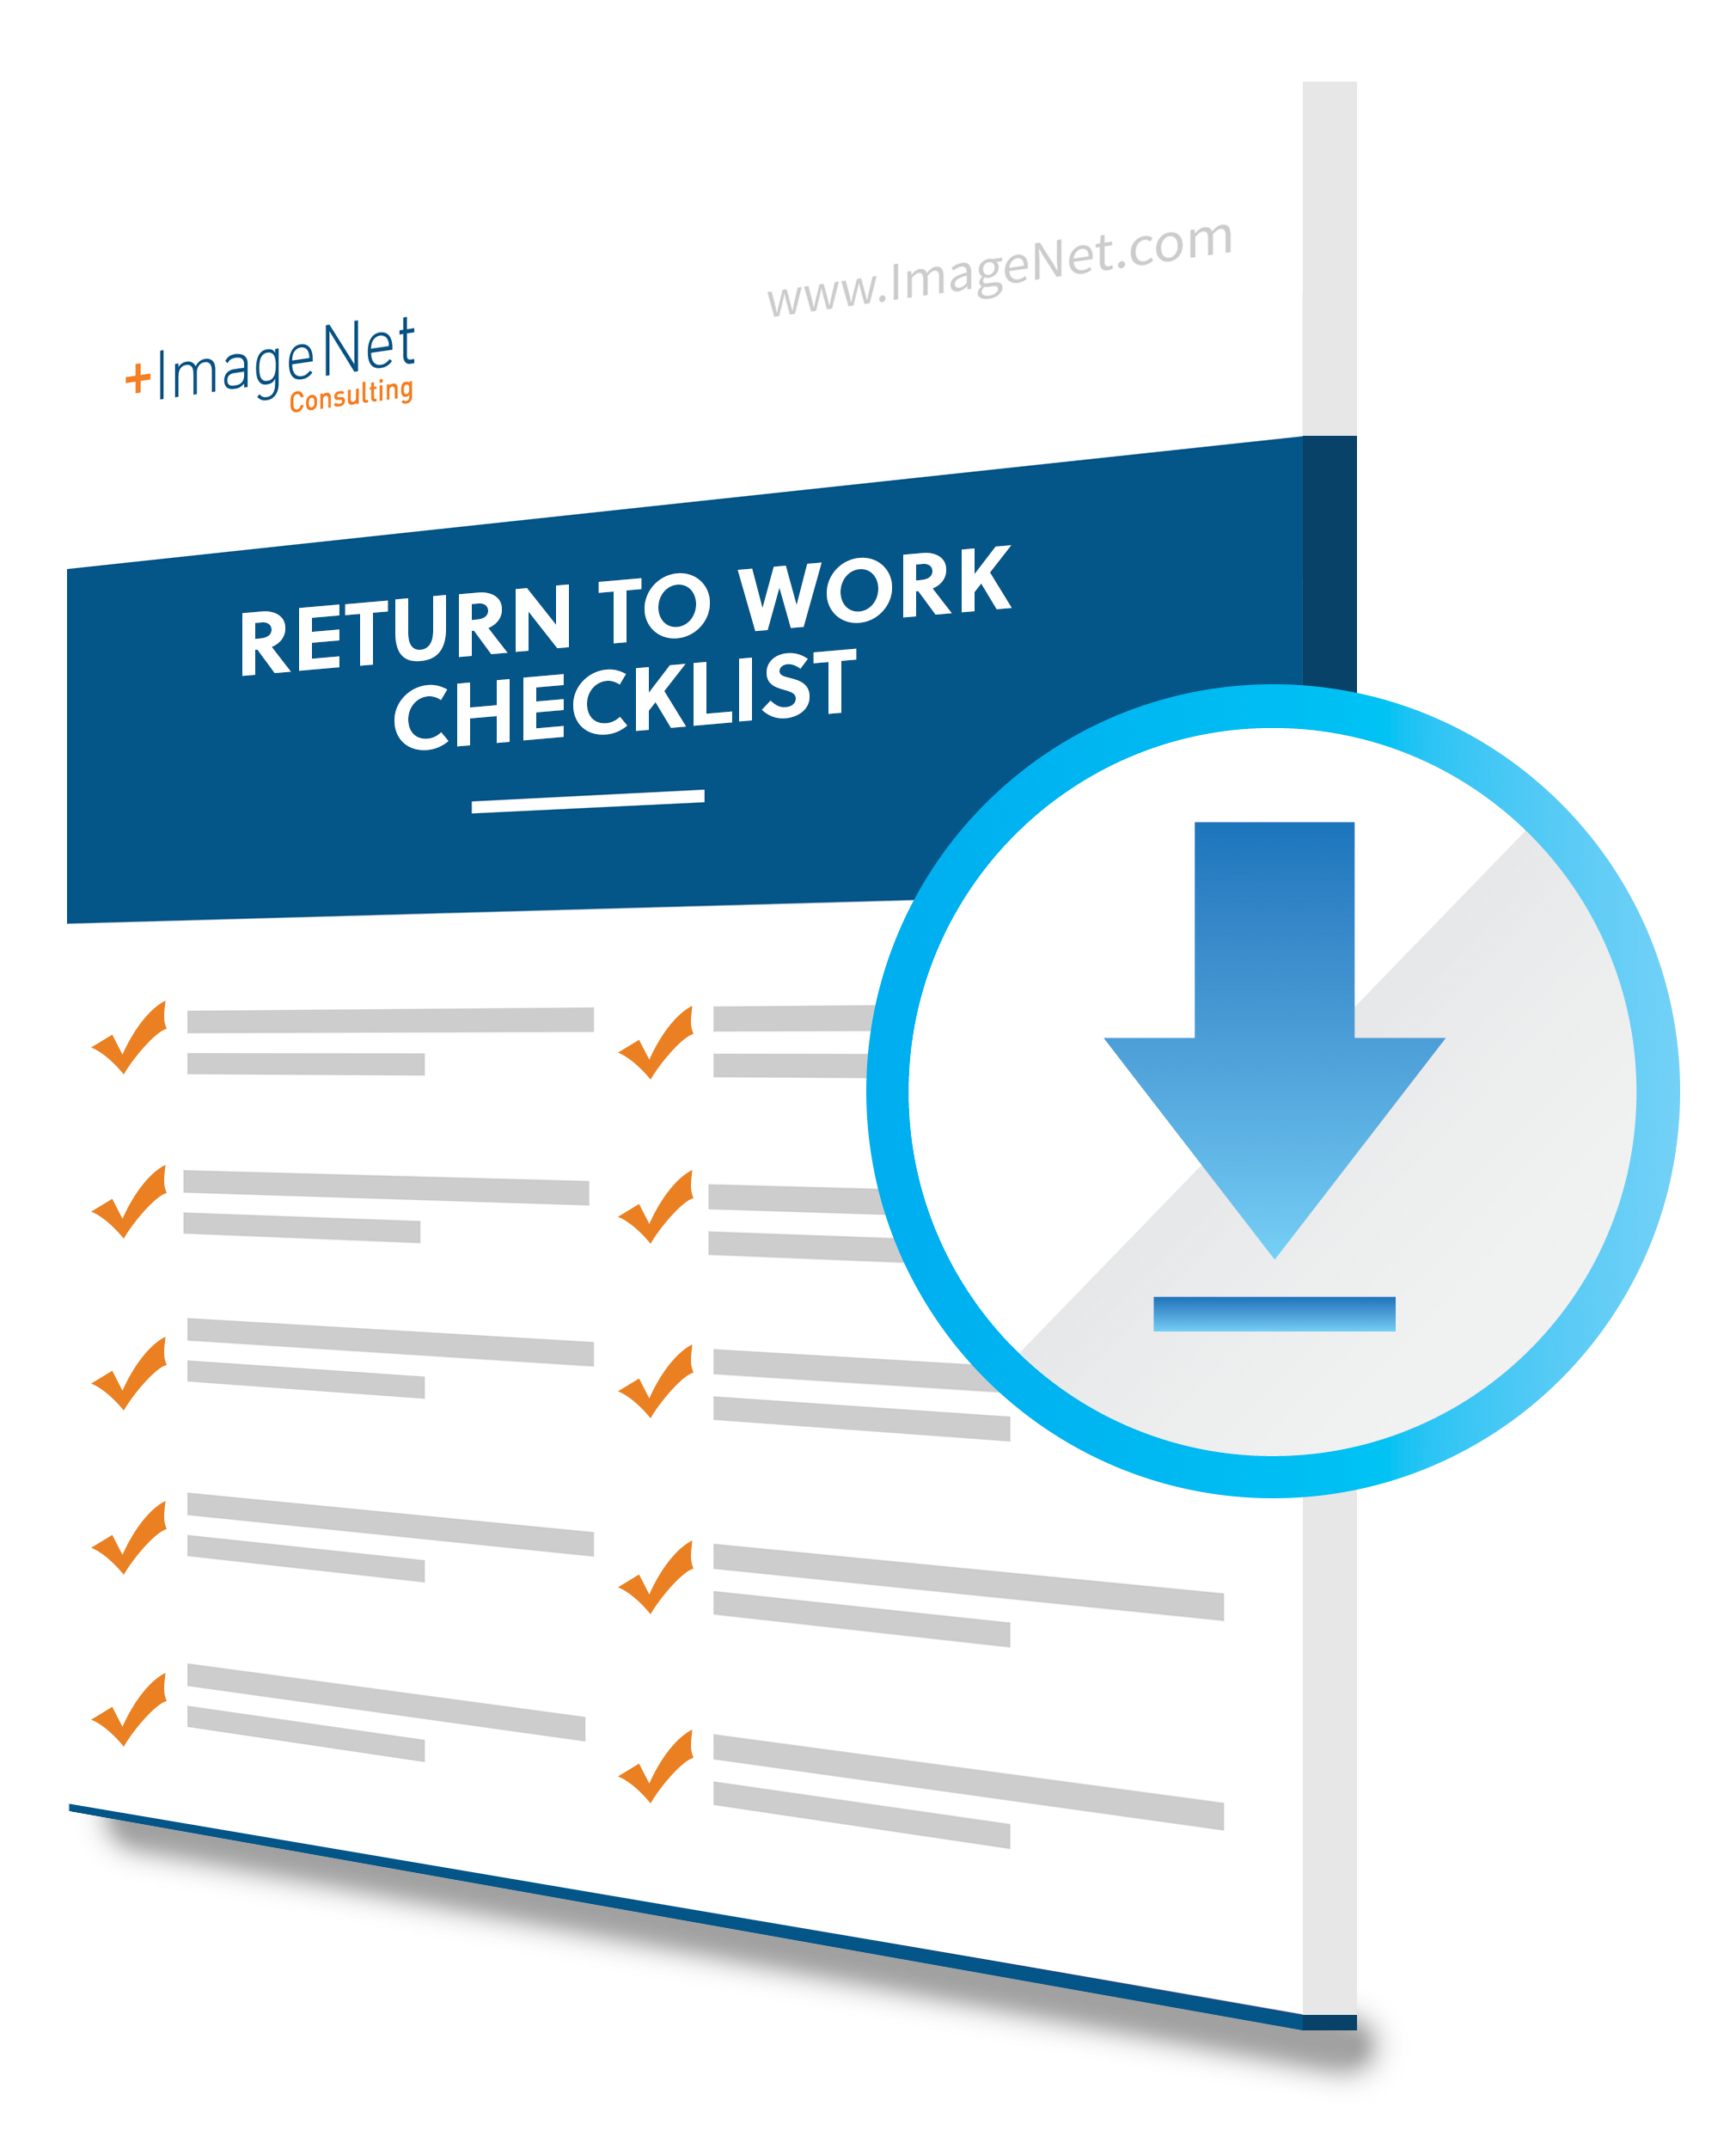 Return to Work Checklist - Guide Image